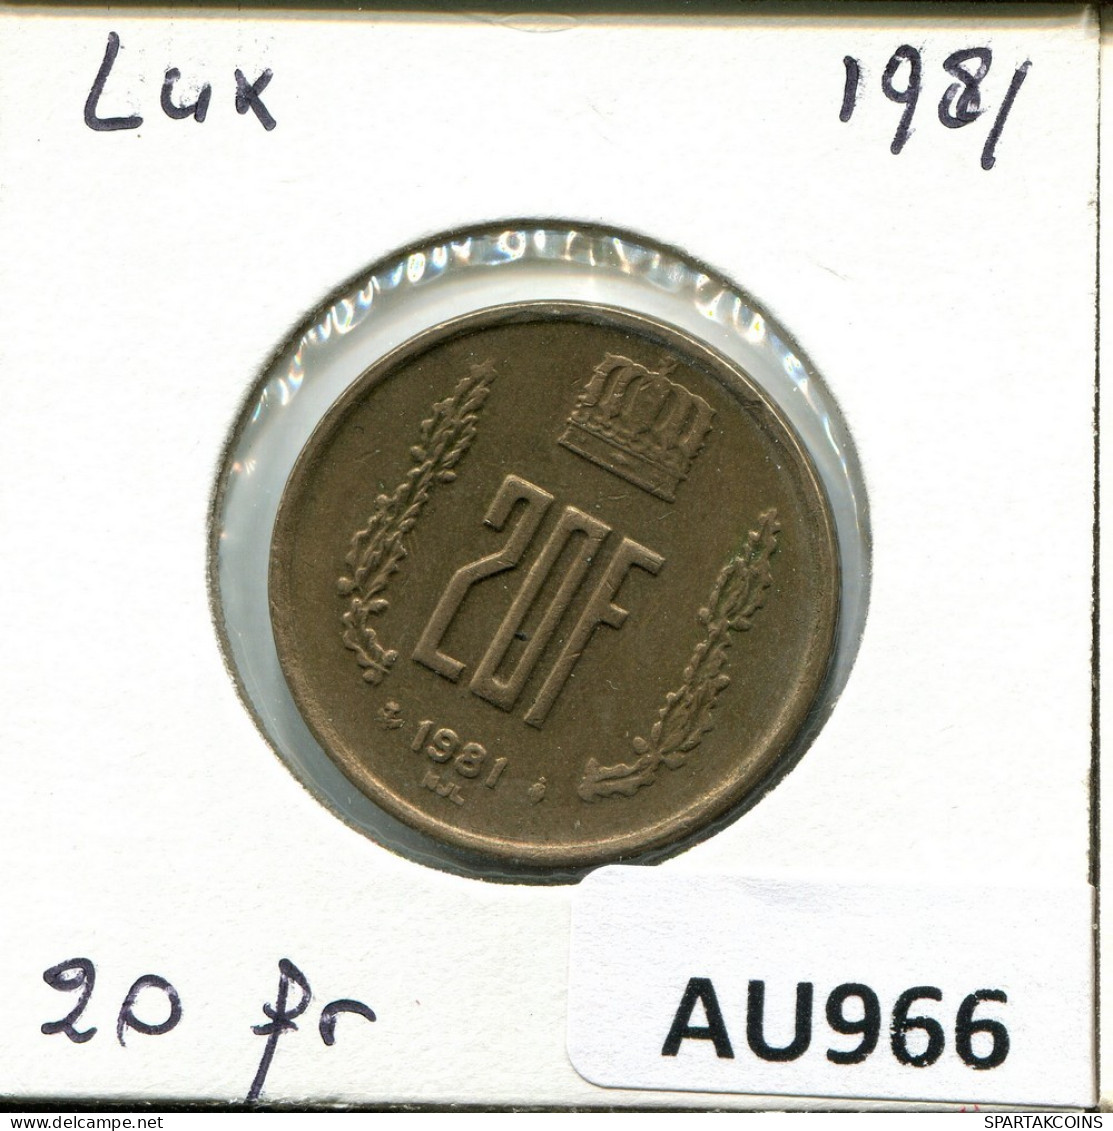 20 FRANCS 1981 LUXEMBOURG Coin #AU966.U.A - Luxemburg